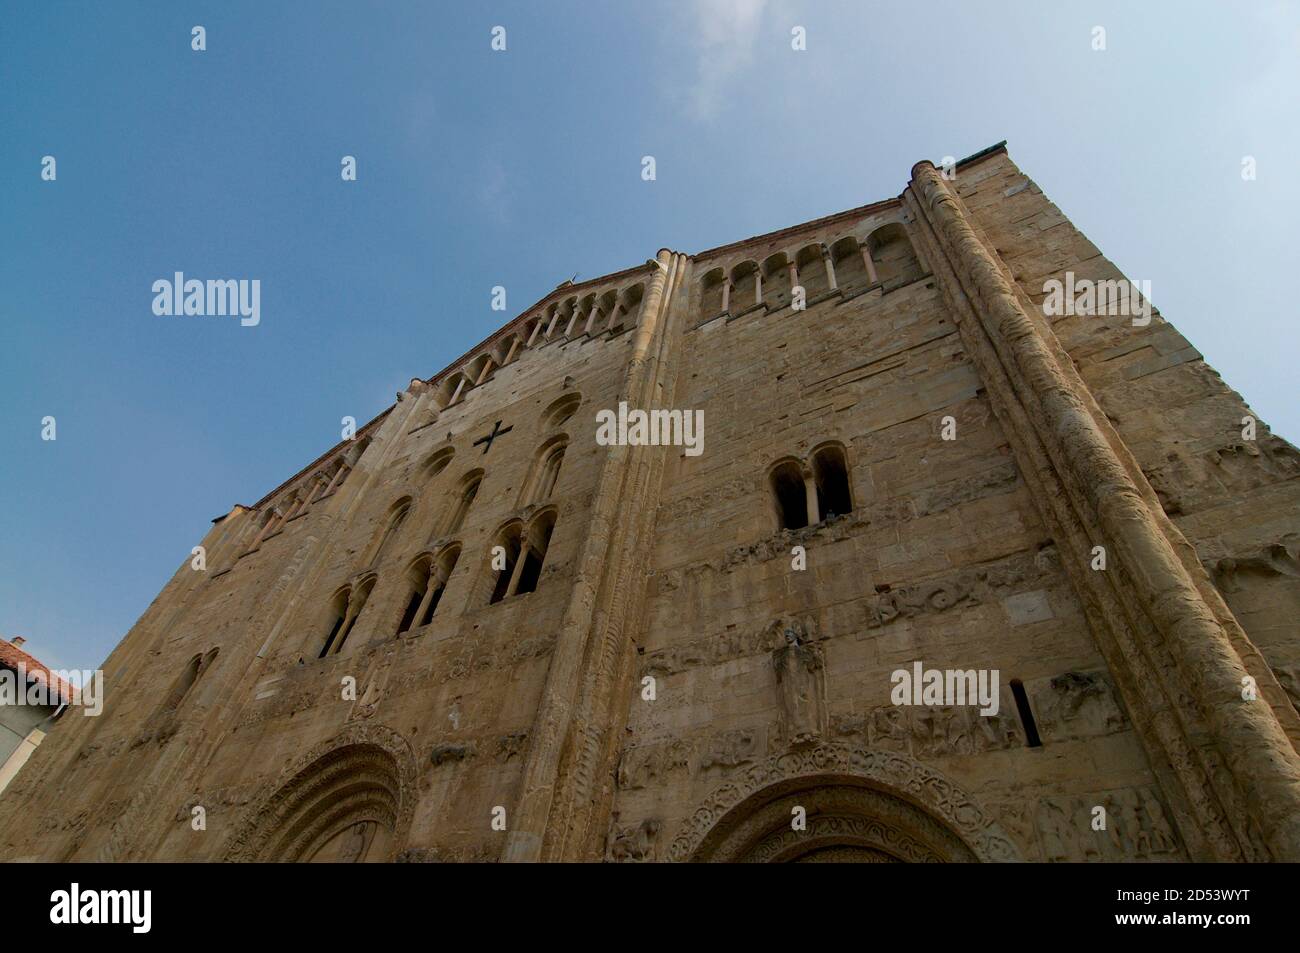 Low angle view of the Basilica San Michele church in Pavia. The Basilica dates from the 11th and 12th centuries and is built of Lombard-Romanesque sty Stock Photo